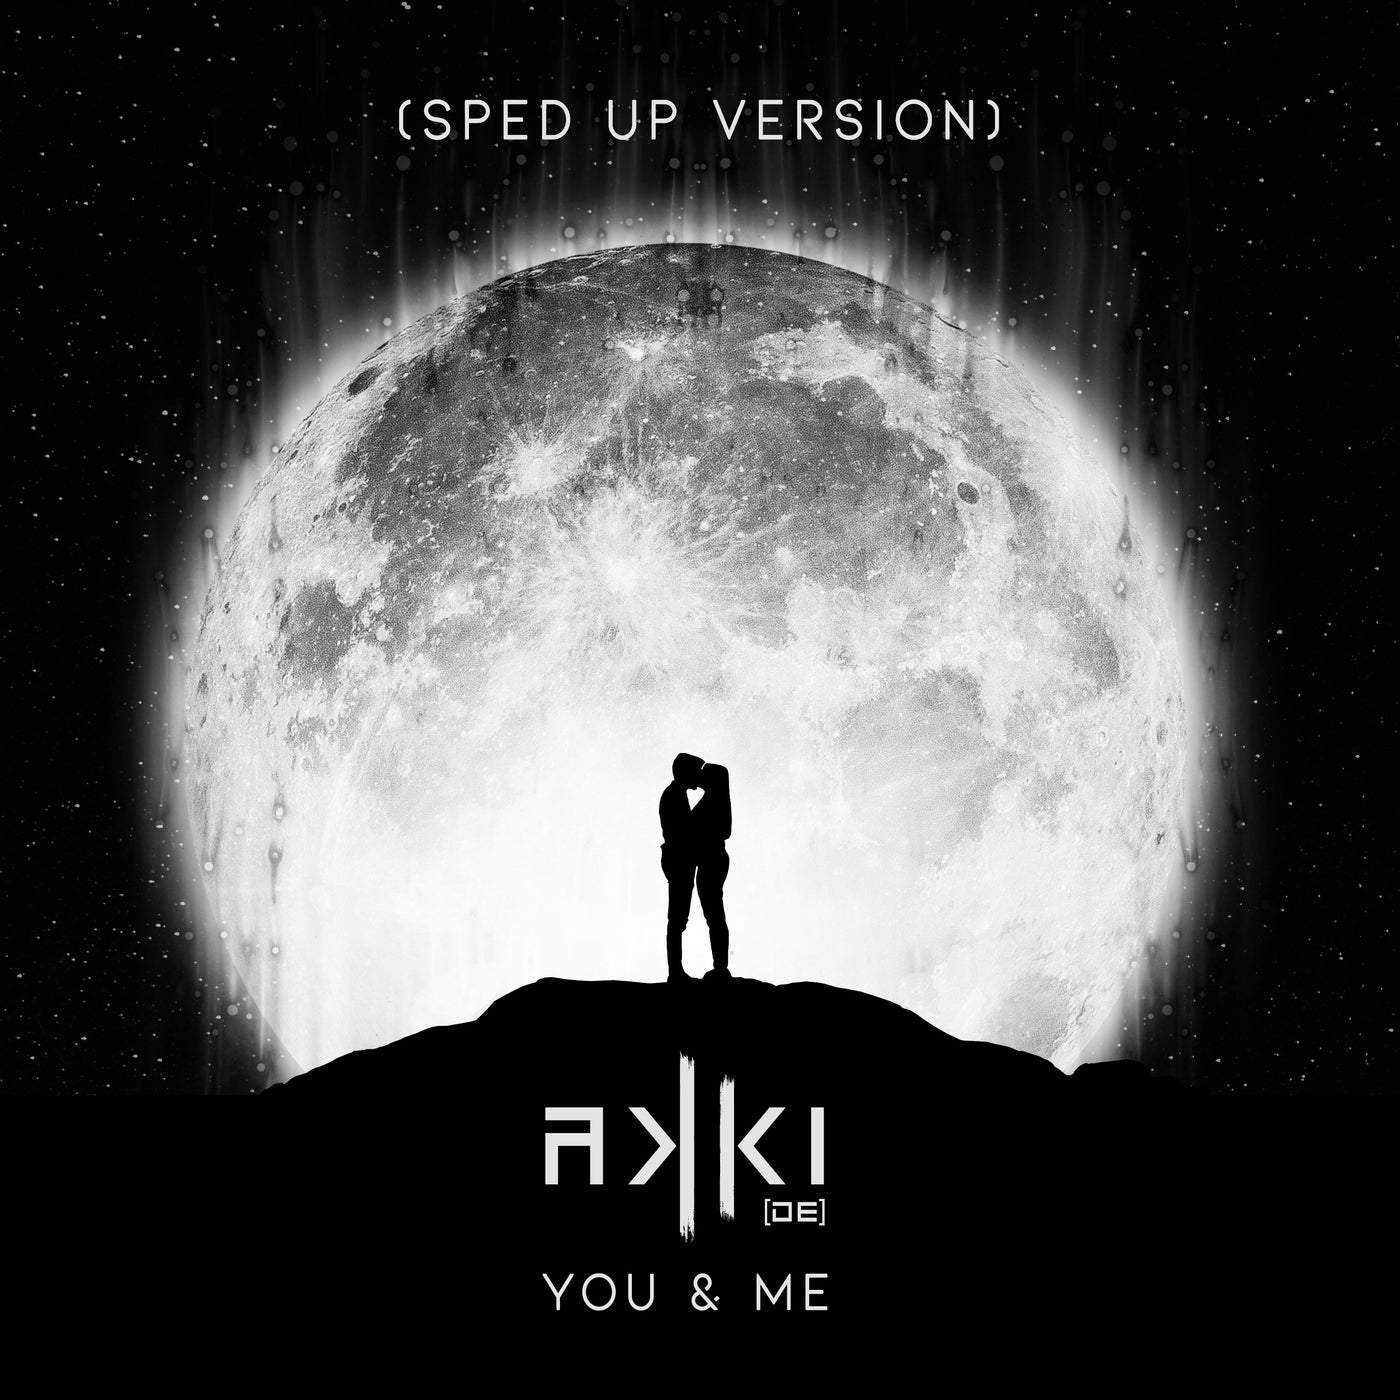 image cover: You & Me - Sped Up Extended Version by AKKI (DE) on From The Soul